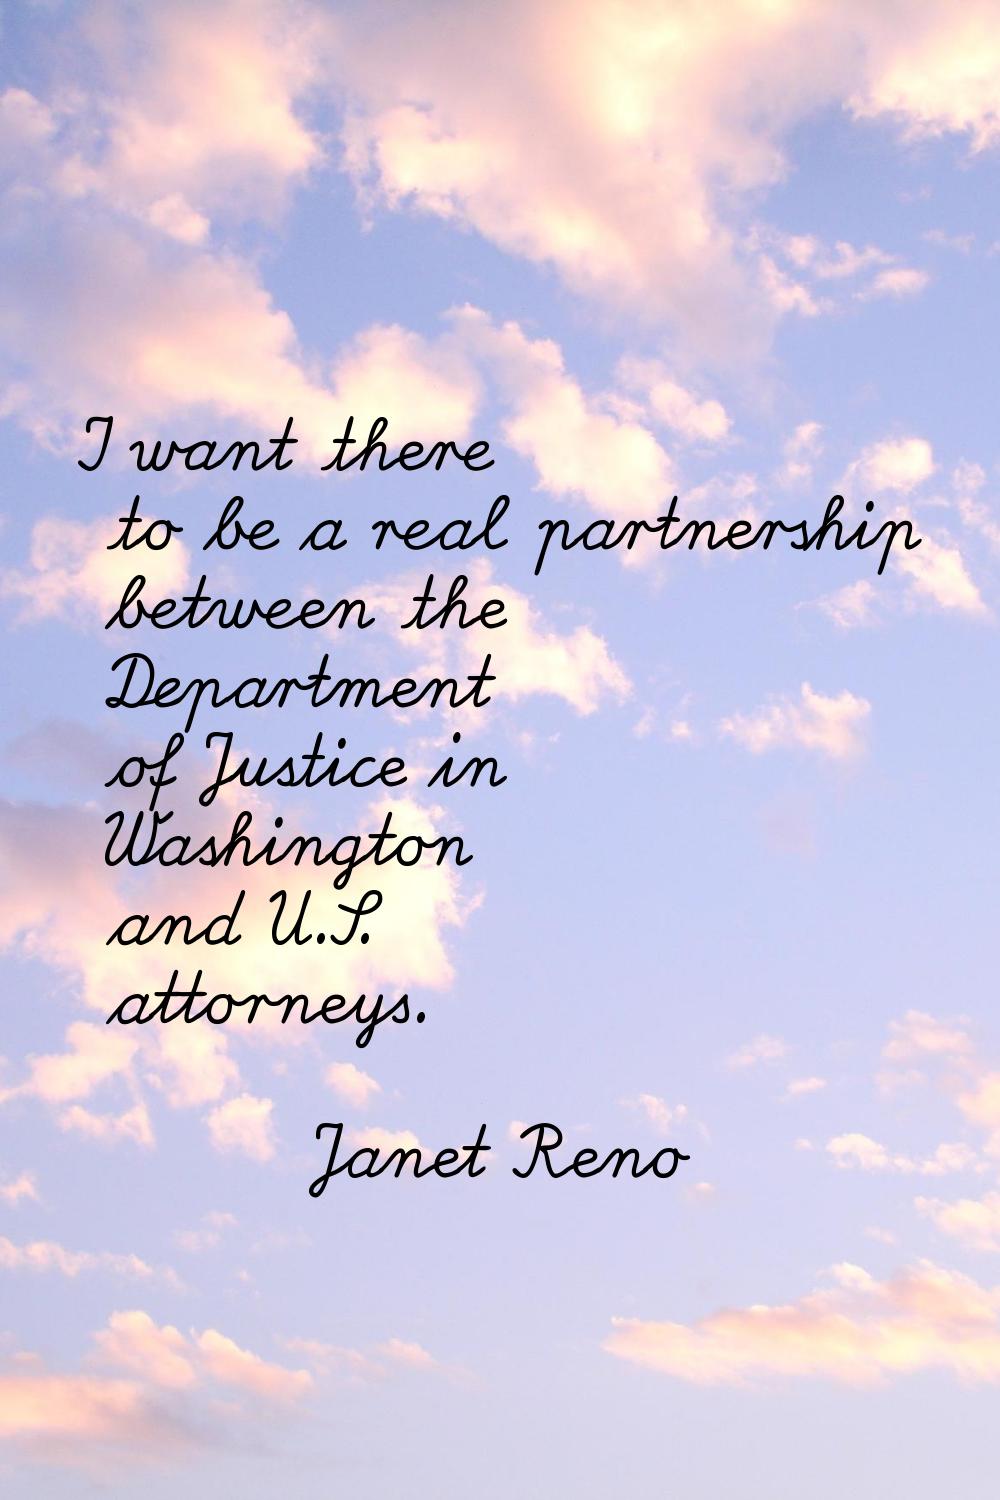 I want there to be a real partnership between the Department of Justice in Washington and U.S. atto